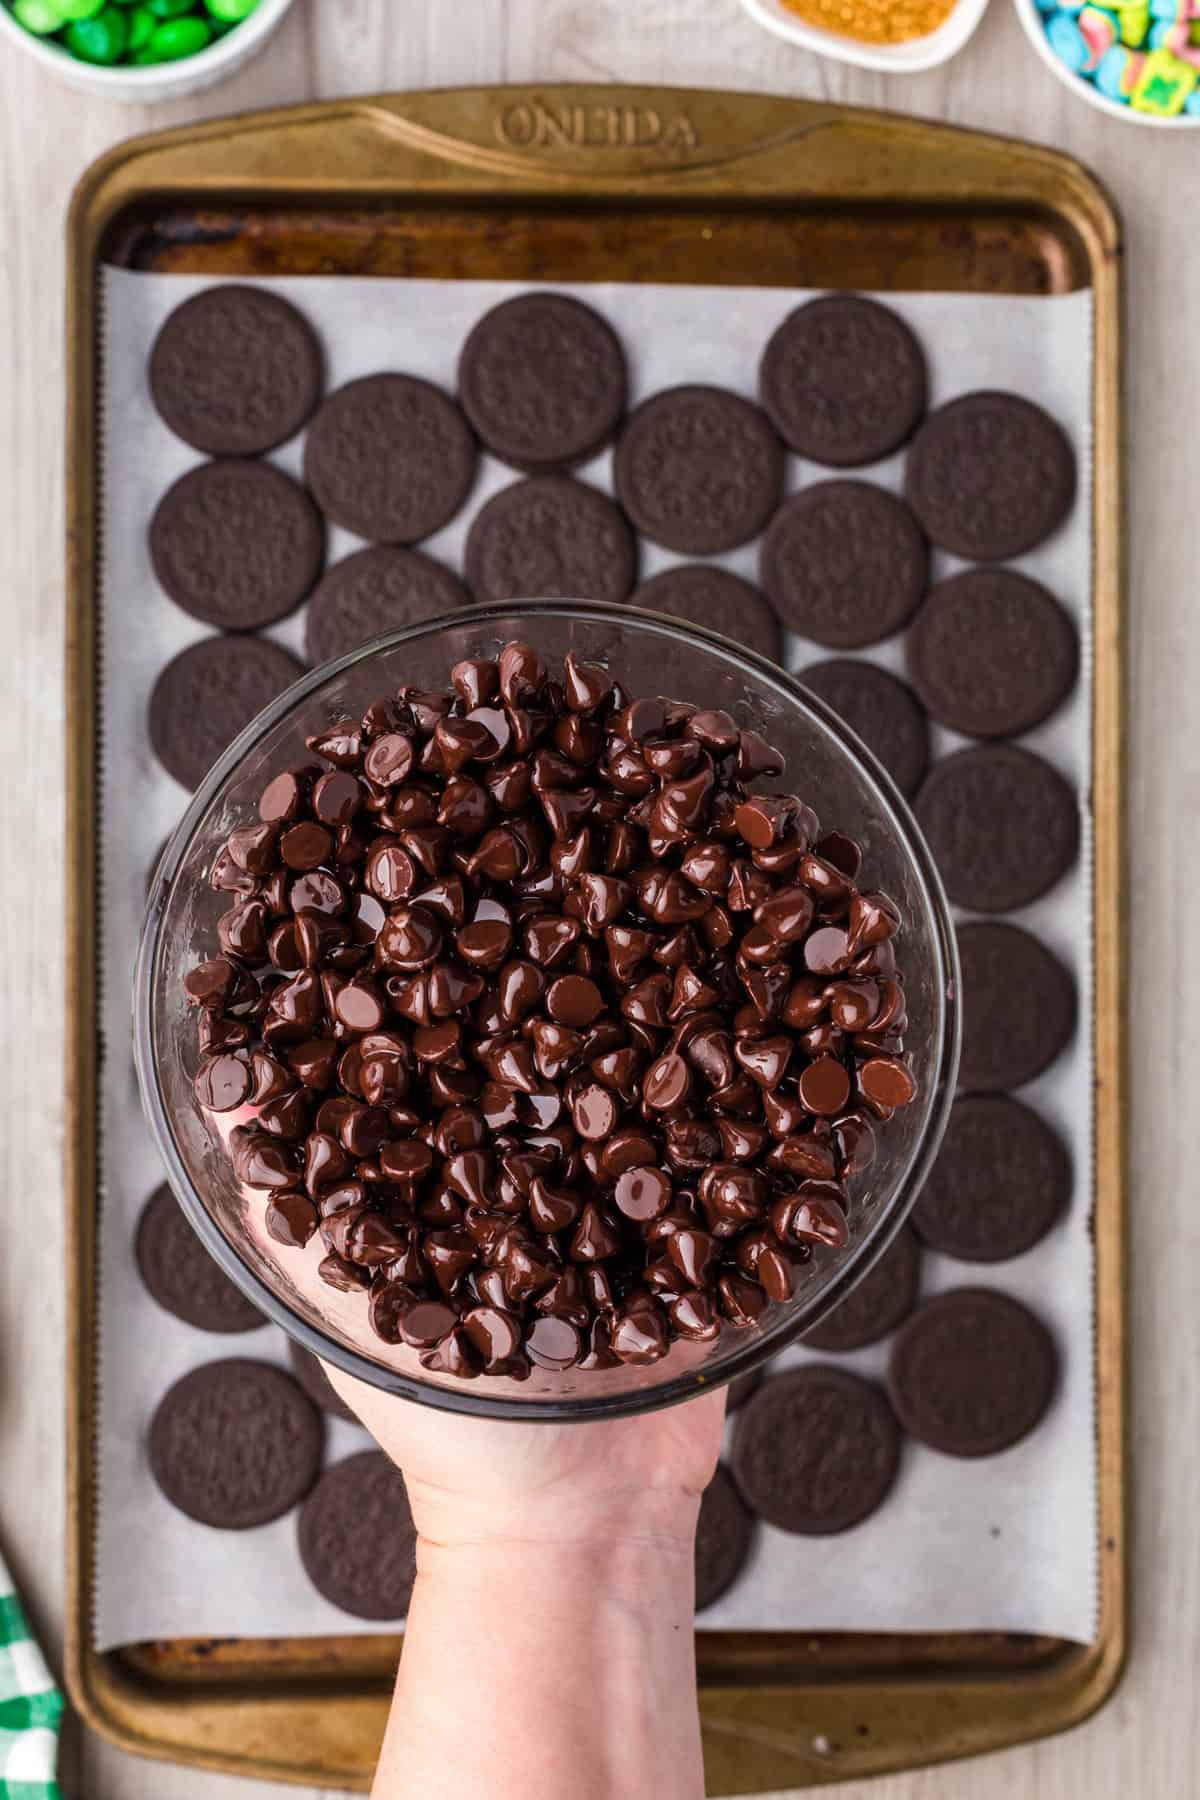 Put chocolates in a microwave Safe Bowl